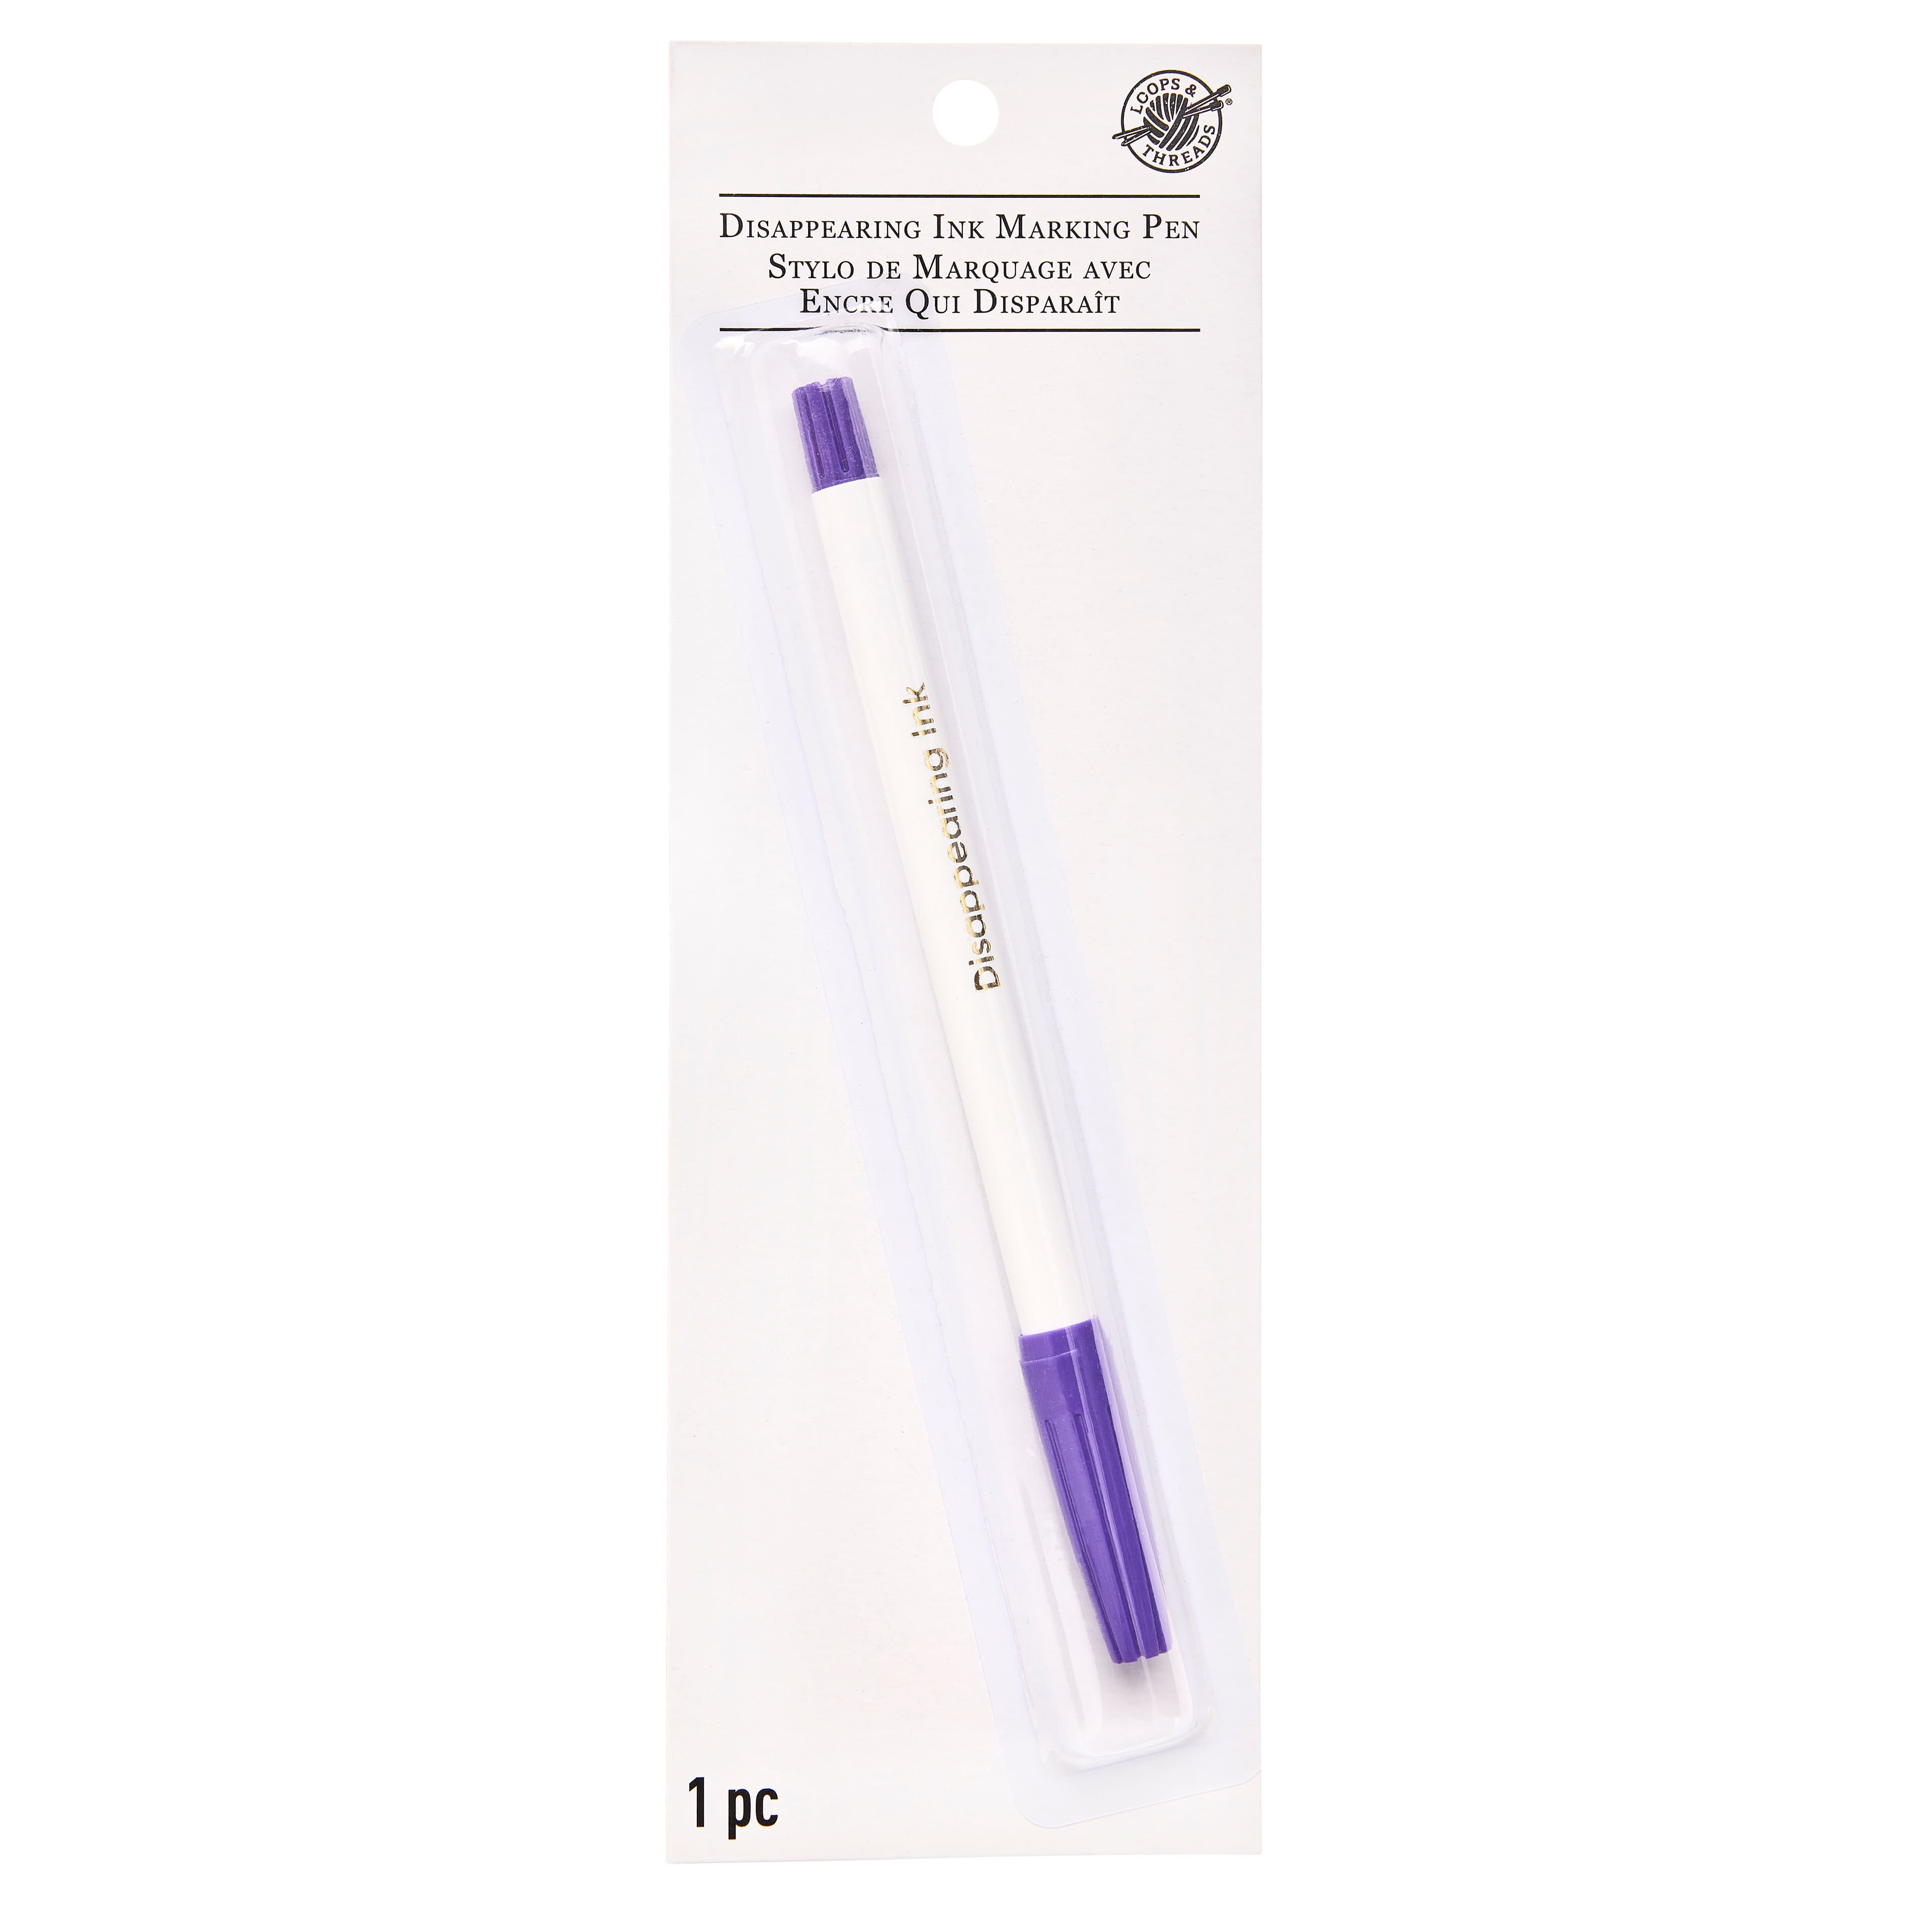 12 Pack: Disappearing Ink Marking Pen by Loops & Threads™